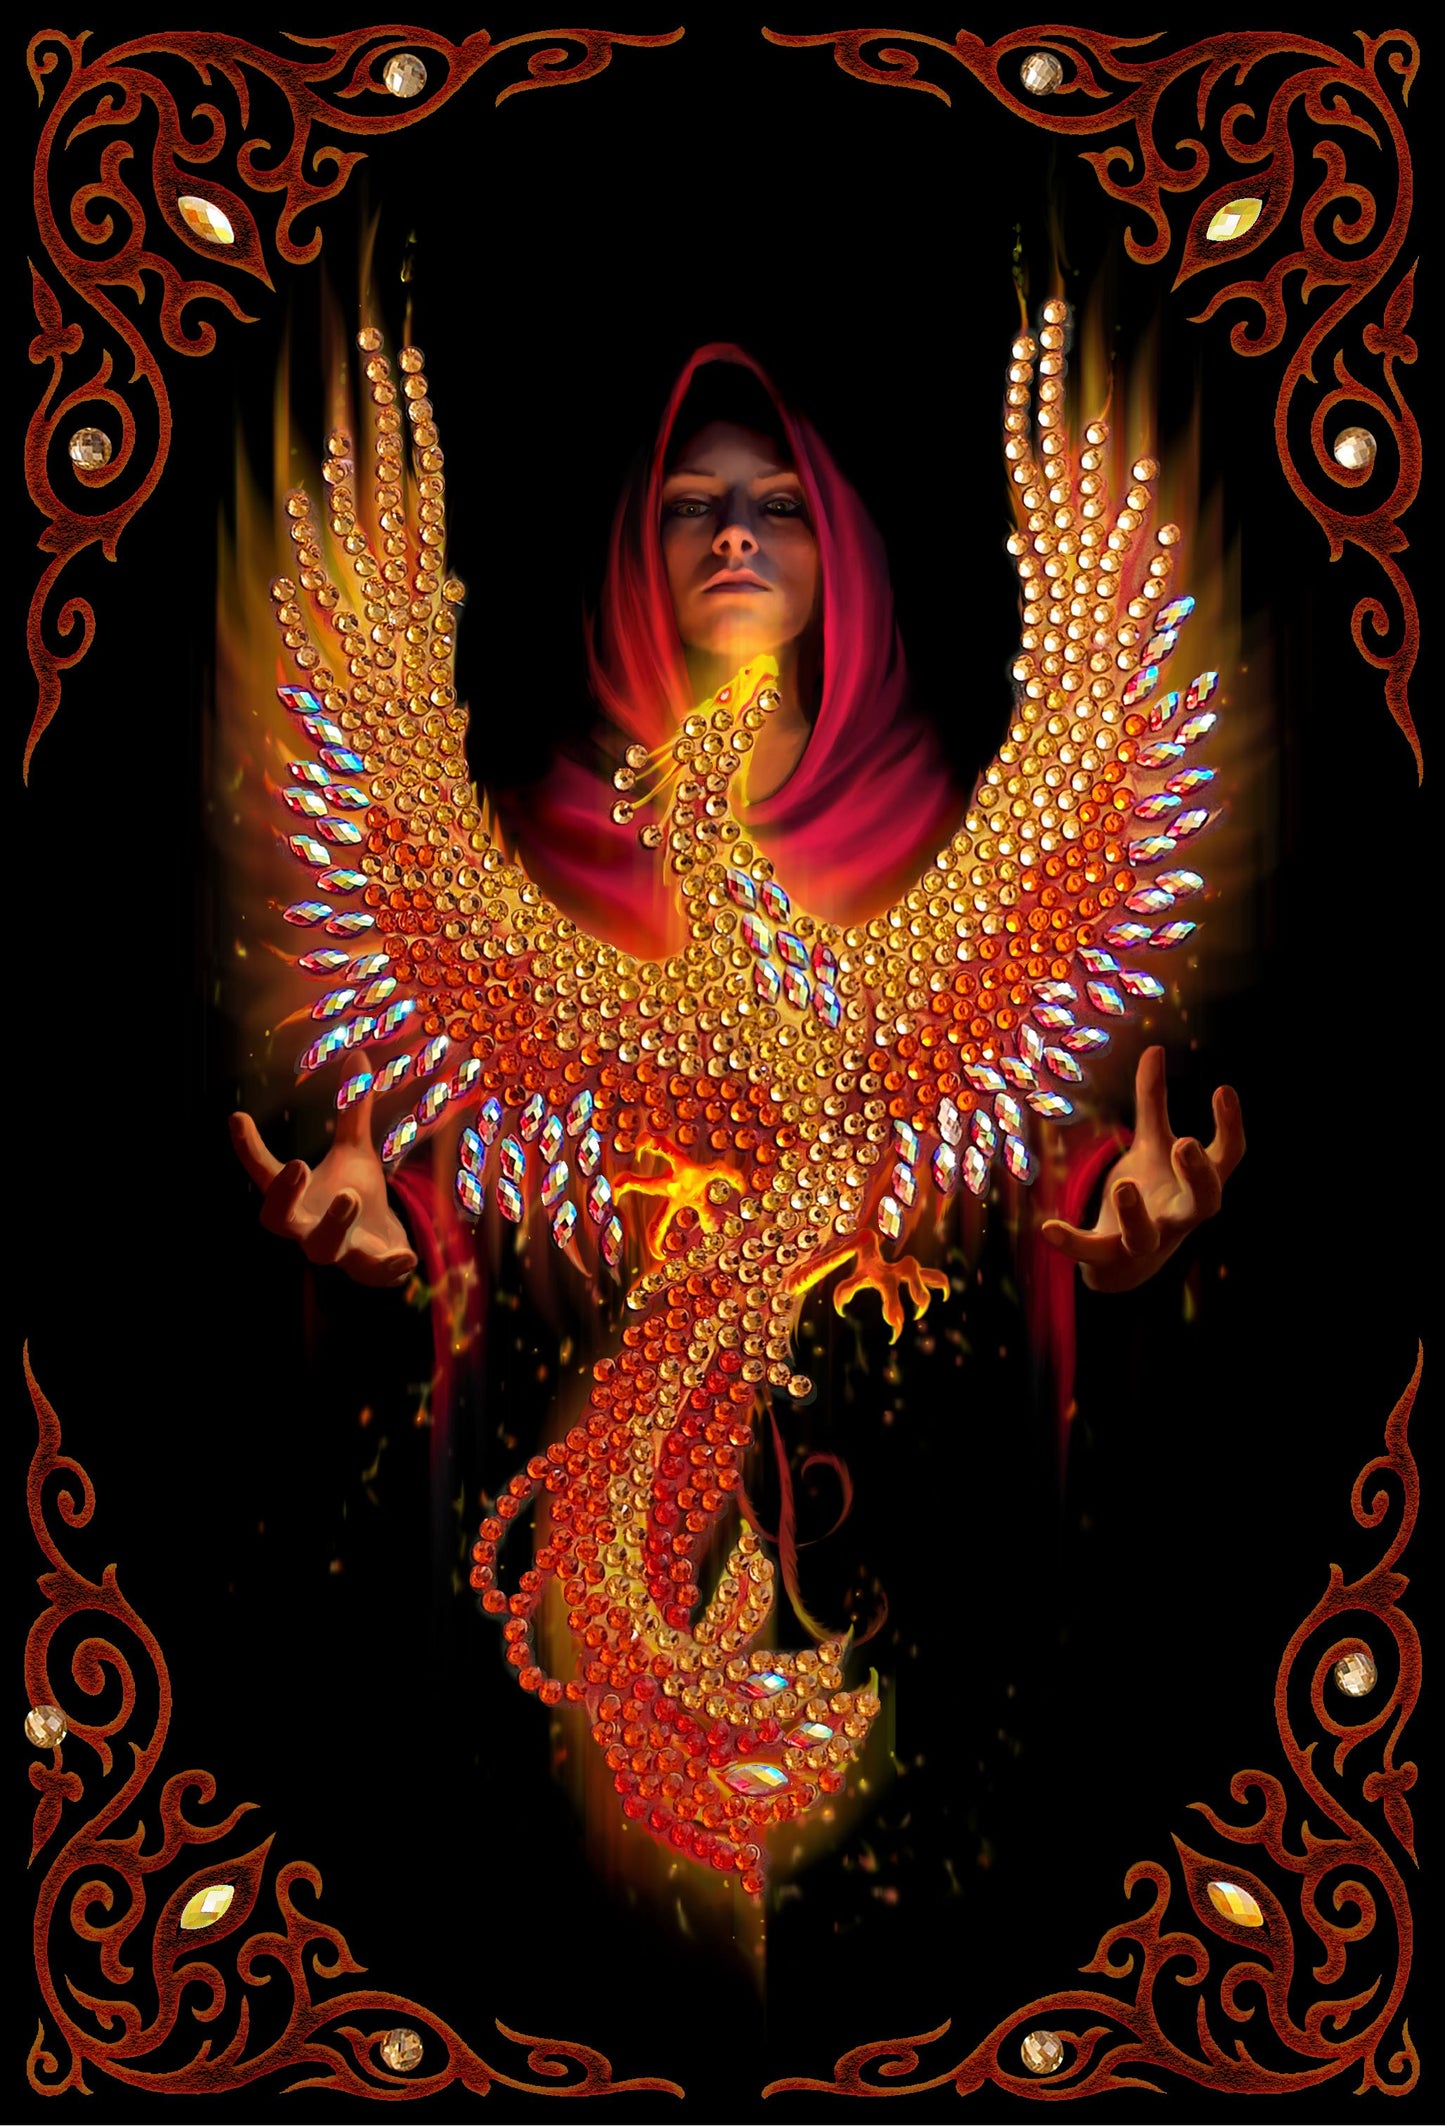 Crystal Art Notebook - Phoenix Rising by Anne Stokes